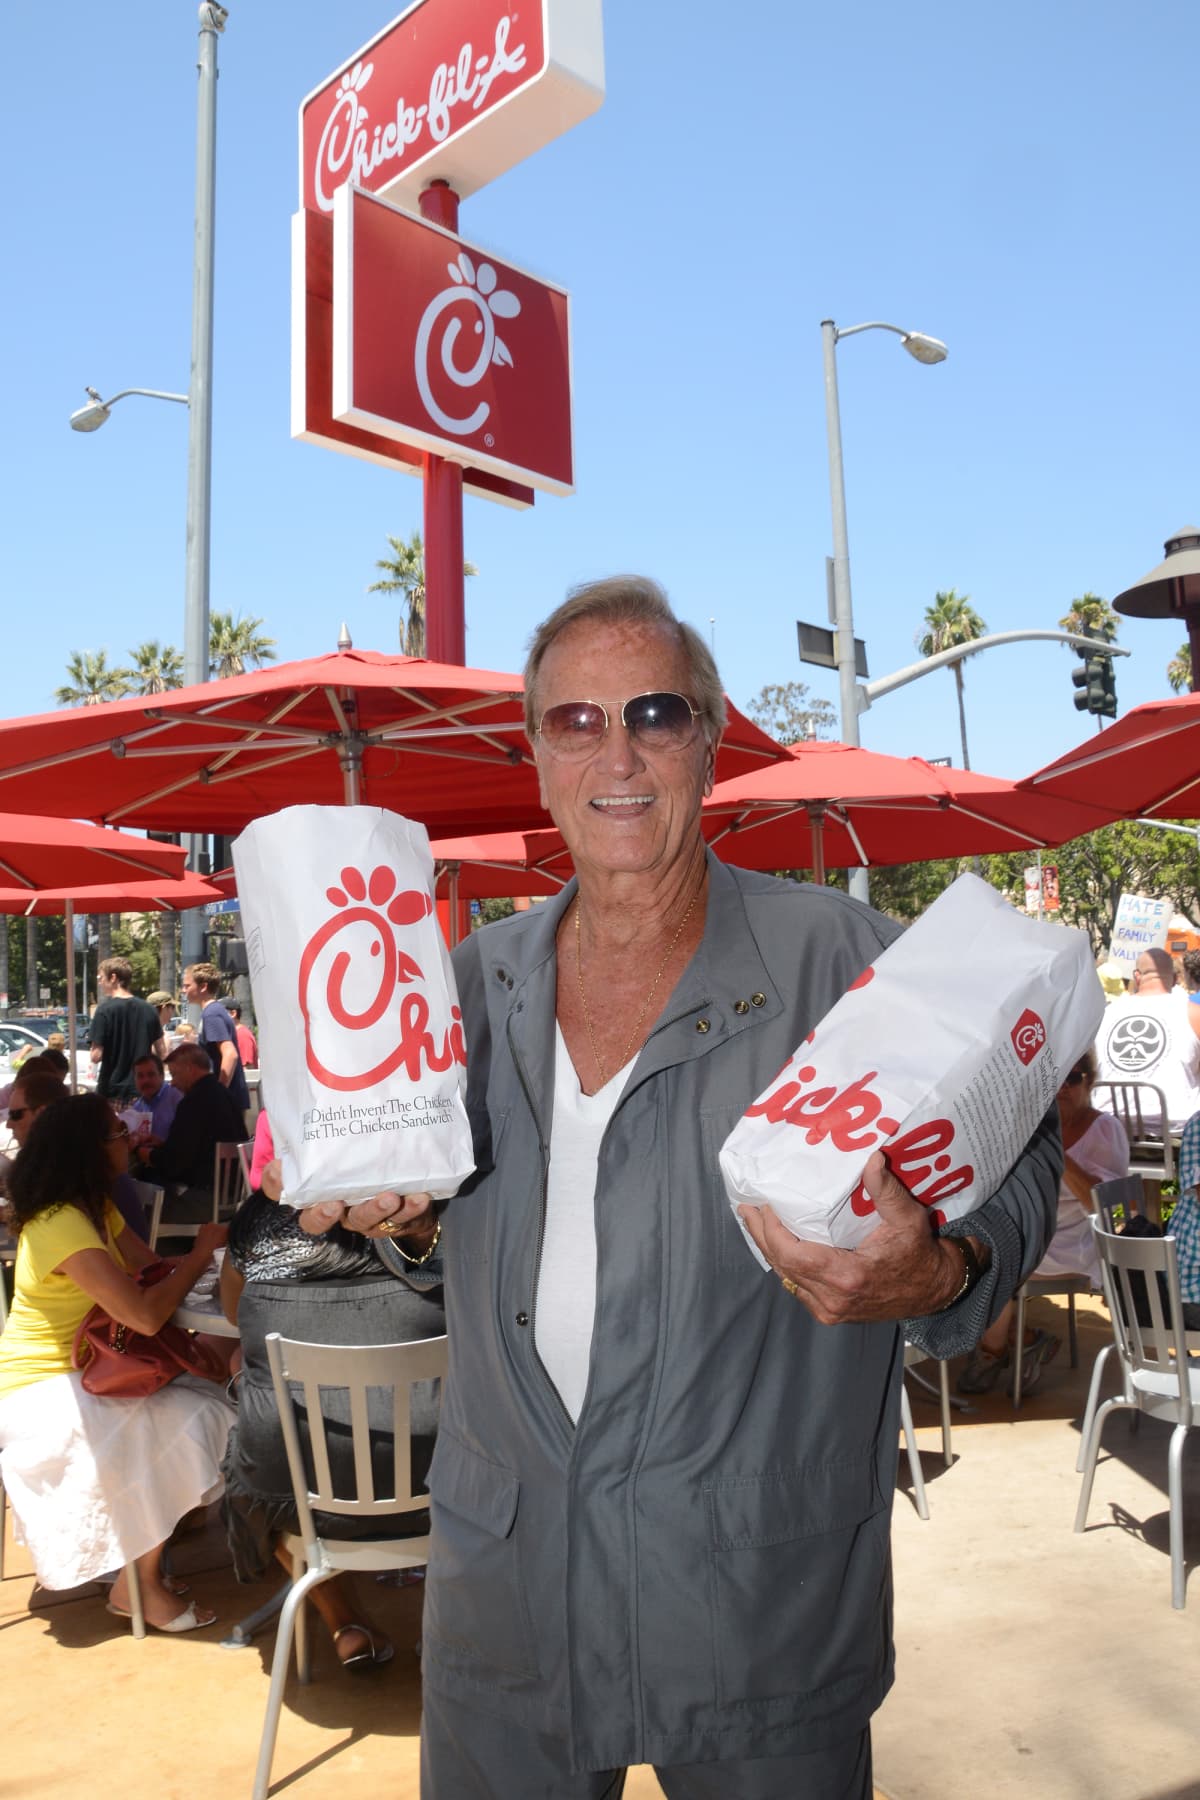 HOLLYWOOD, CA - AUGUST 01: Chick-fil-A supporter recording artist Pat Boone attends PETA and the LGBT community's 'Chick-fil-A Is Anti-Gay!' at Chick-fil-A on August 1, 2012 in Hollywood, California. (Photo by Araya Doheny/WireImage)